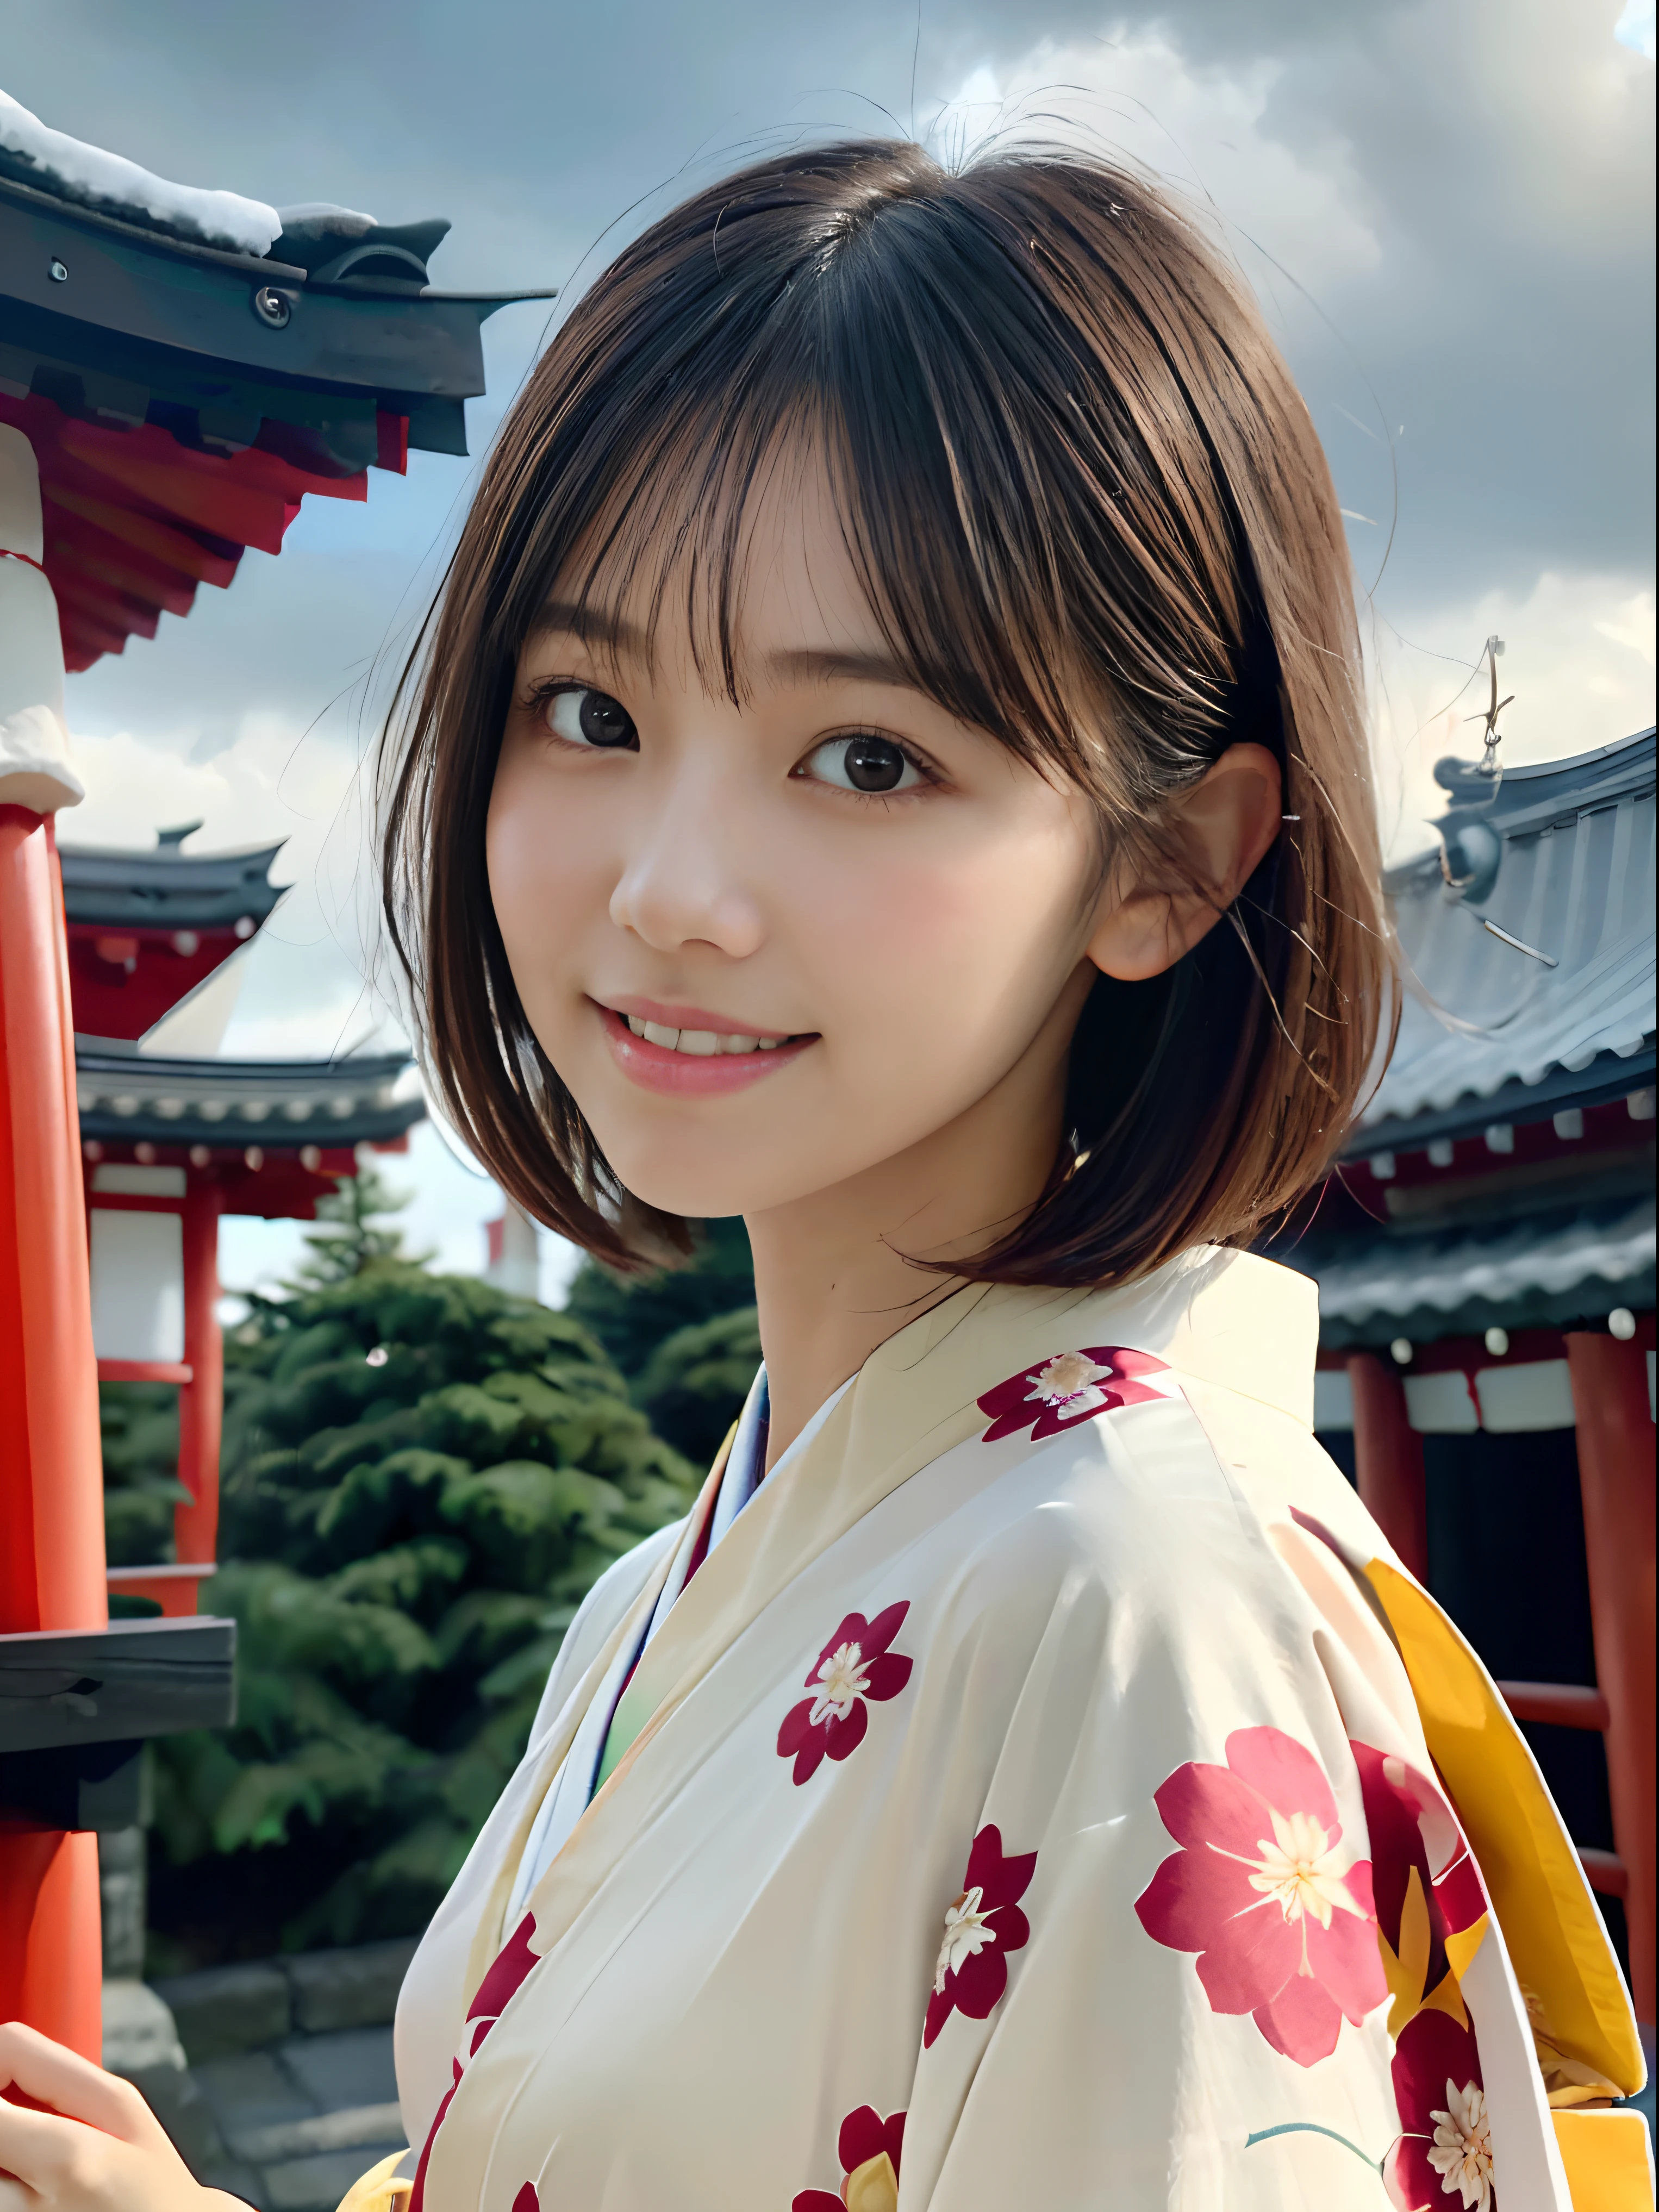 (Close up portrait of girl has short hair with dull bangs in beautiful colorful kimono:1.5)、(One of the girls worshipping the shrine of Japan with a smile:1.3)、(A shrine in Japan with a winter sky:1.5)、(Perfect Anatomy:1.3)、(No mask:1.3)、(complete fingers:1.3)、Photorealistic、Photography、masutepiece、top-quality、High resolution, delicate and pretty、face perfect、Beautiful detailed eyes、Fair skin、Real Human Skin、pores、((thin legs))、(Dark hair)